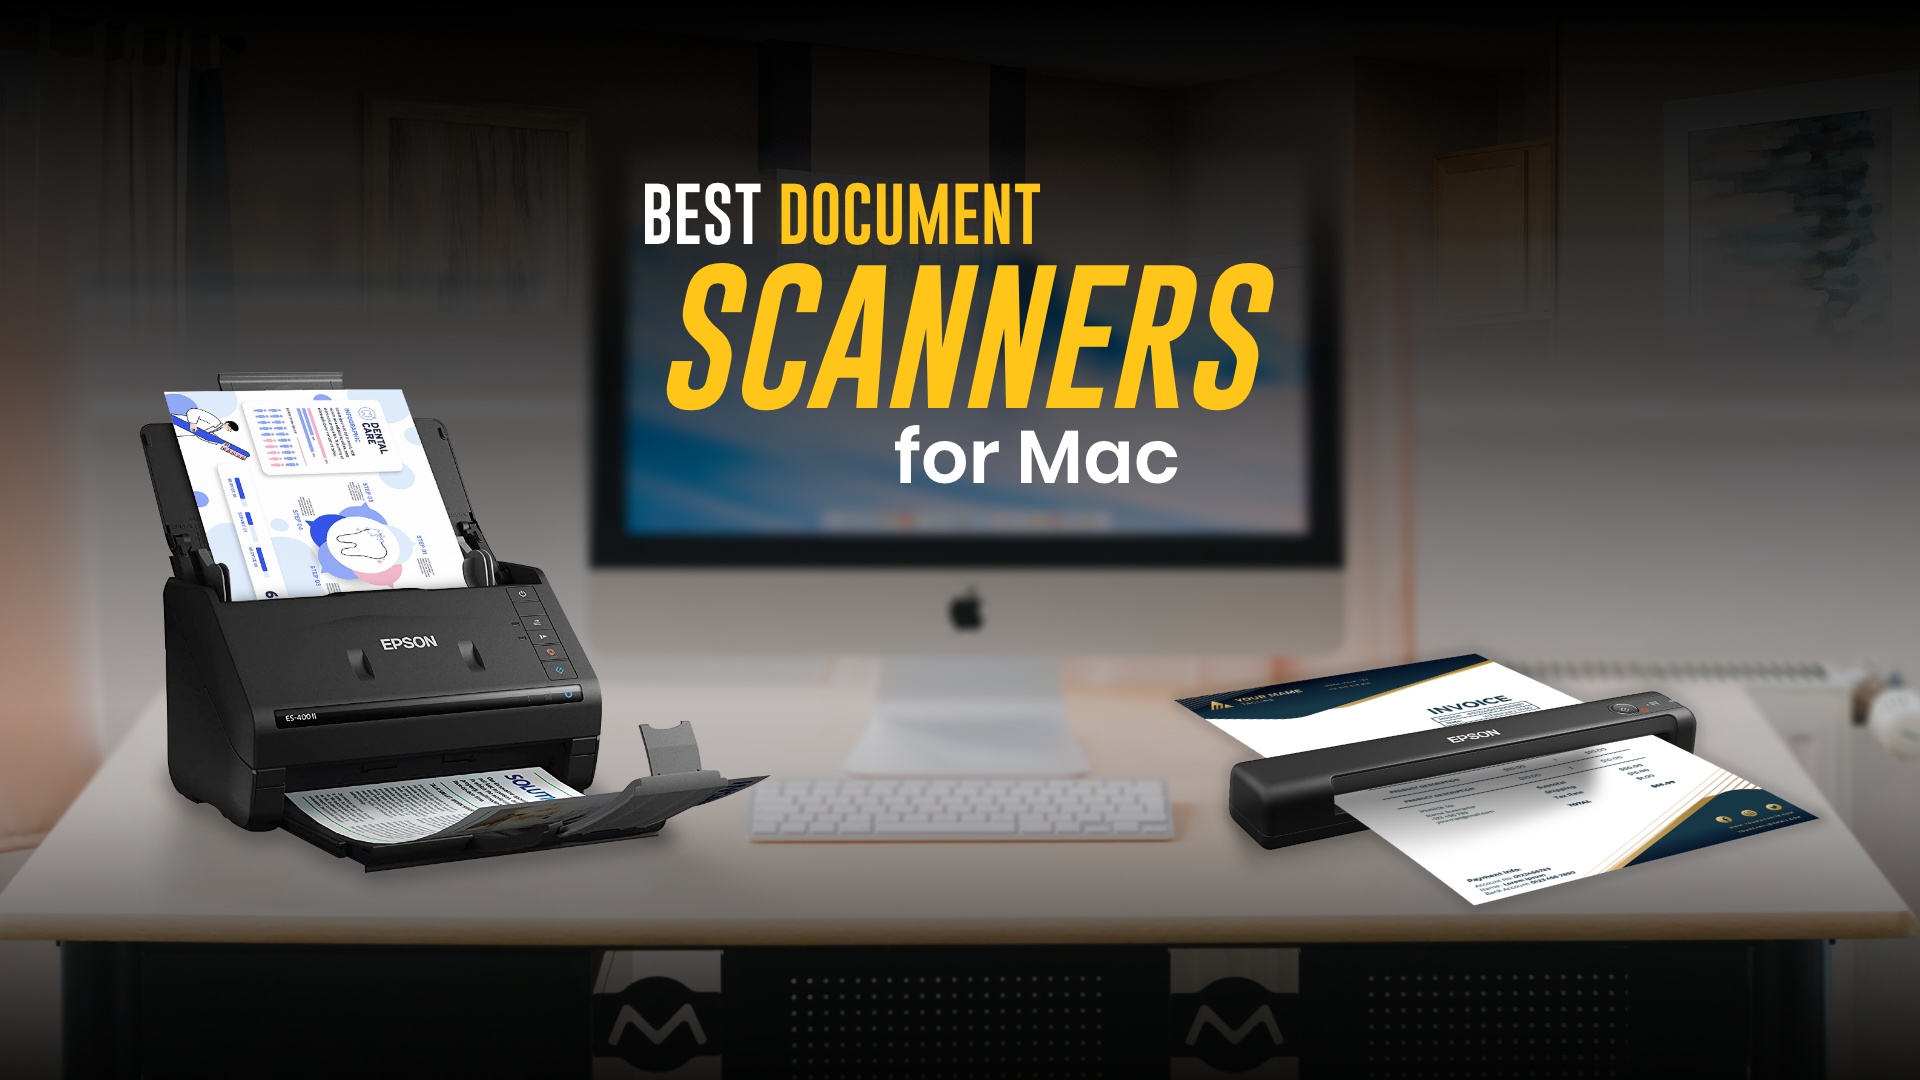 11 Best Document Scanners for Mac in 2022